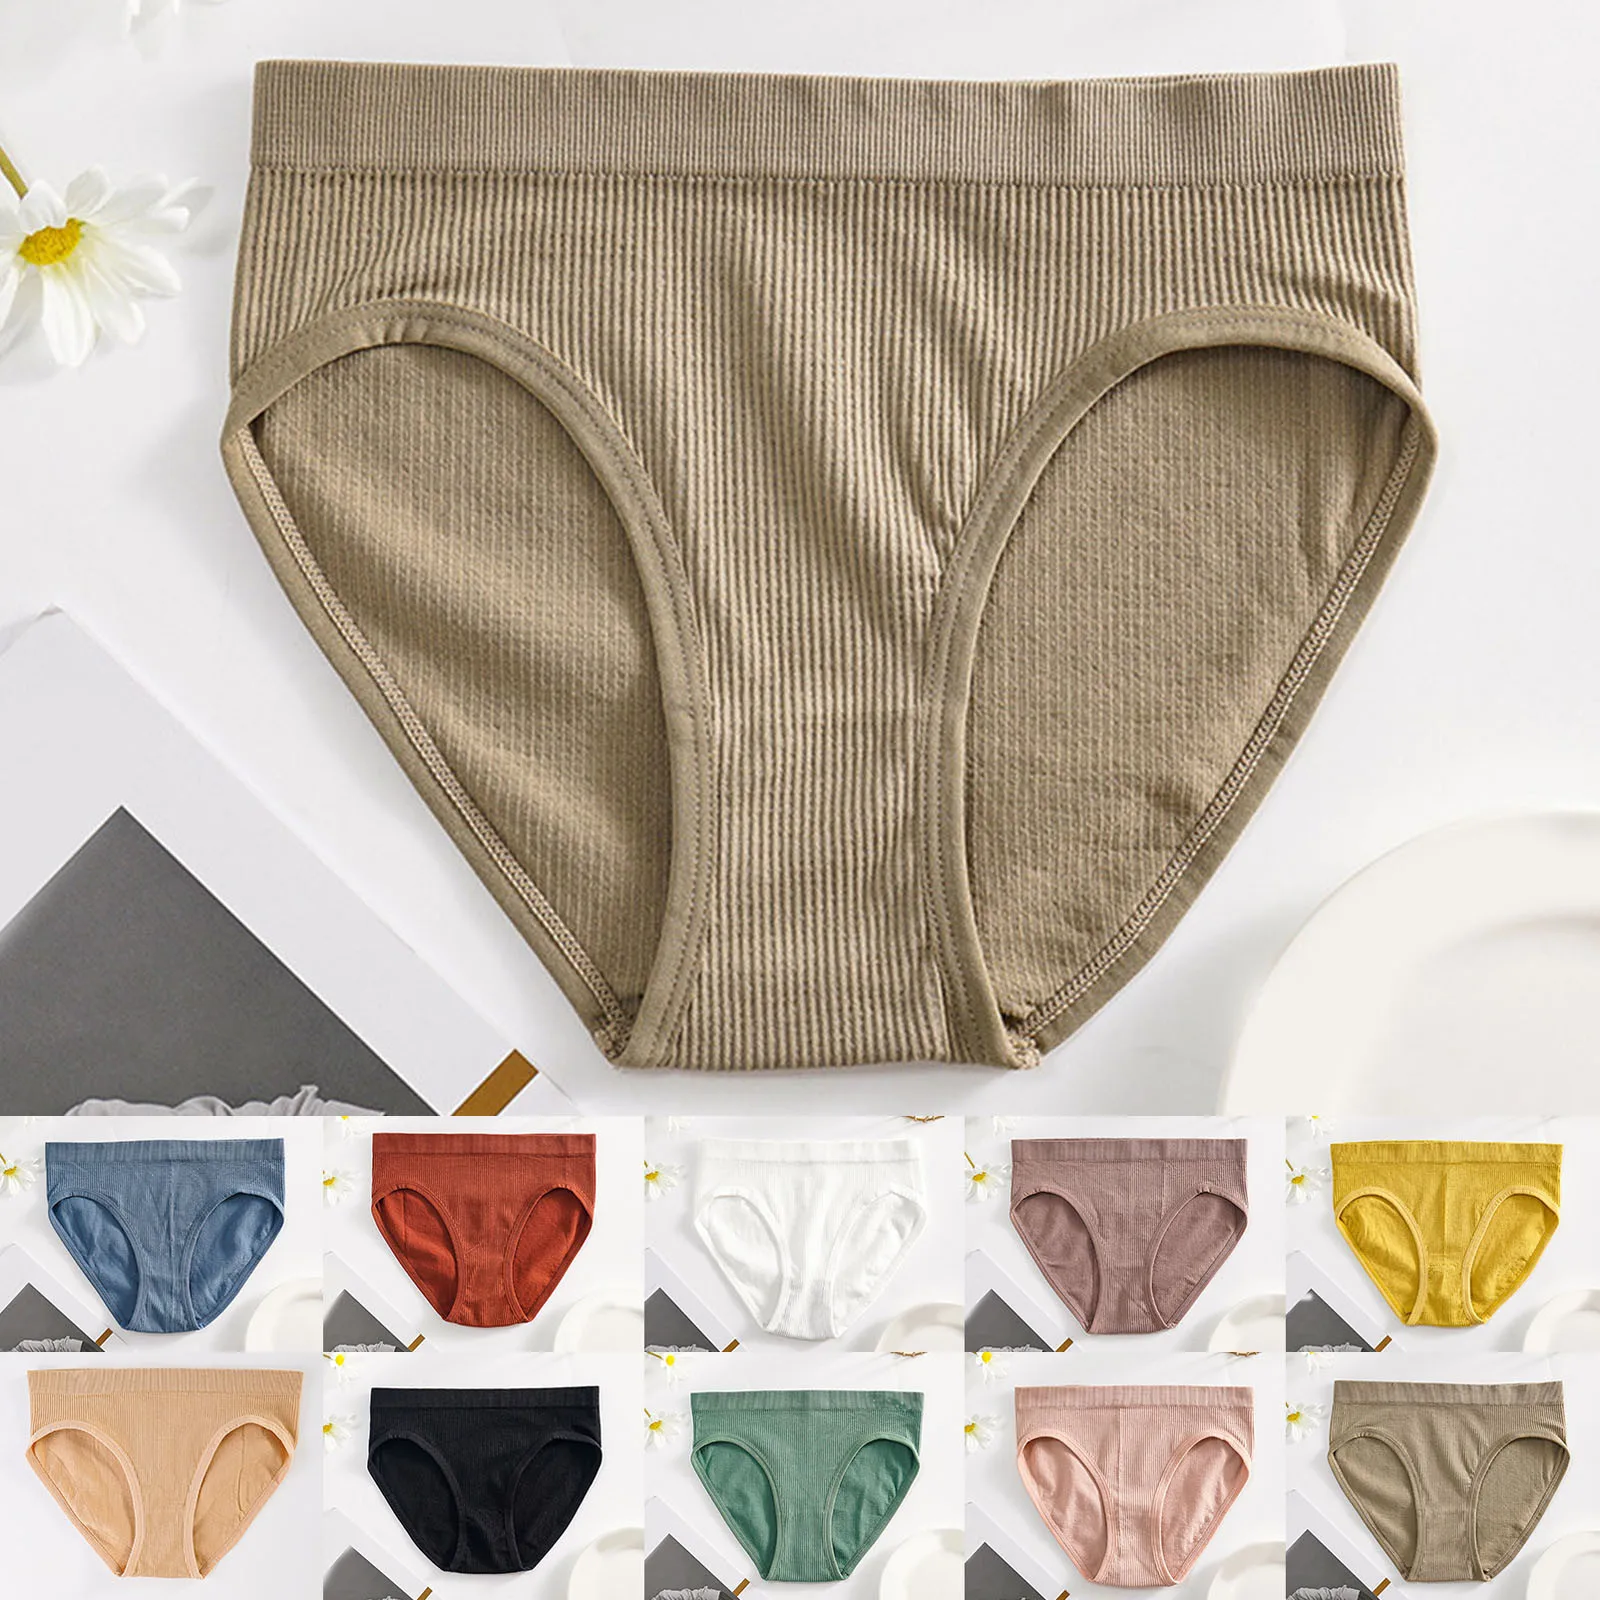 Women High Waisted Panties Ribbed Cotton Seamless Breathable